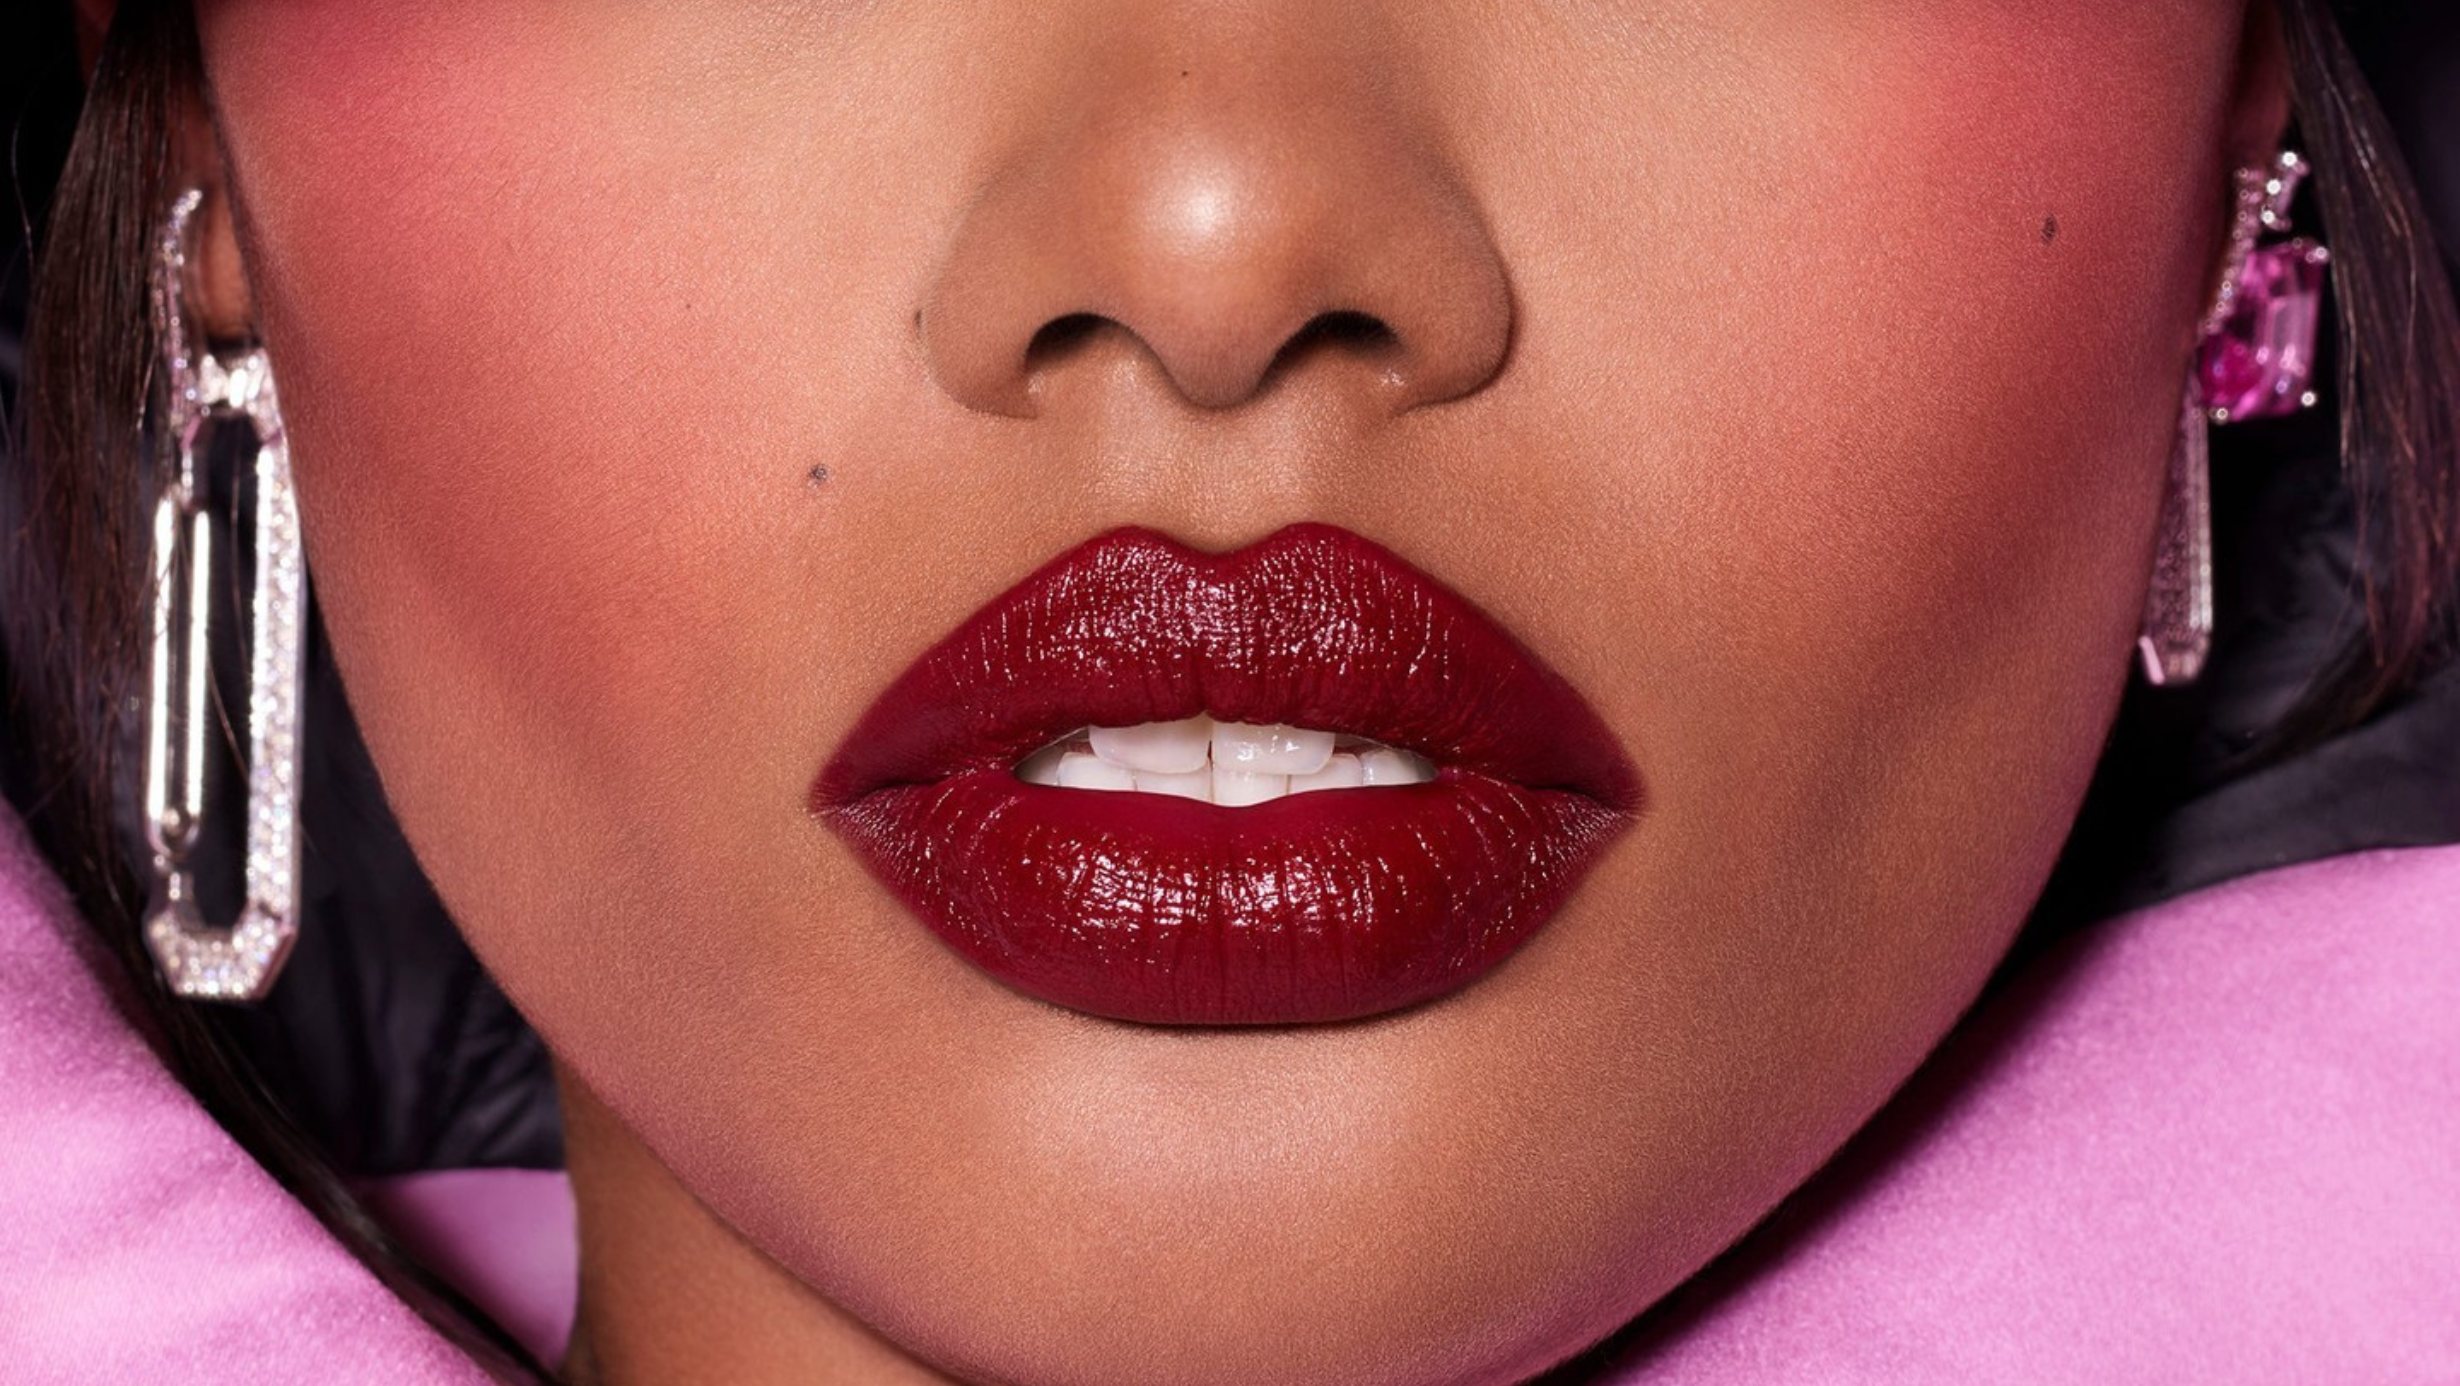 11 Lipsticks In The Best Fall Shades